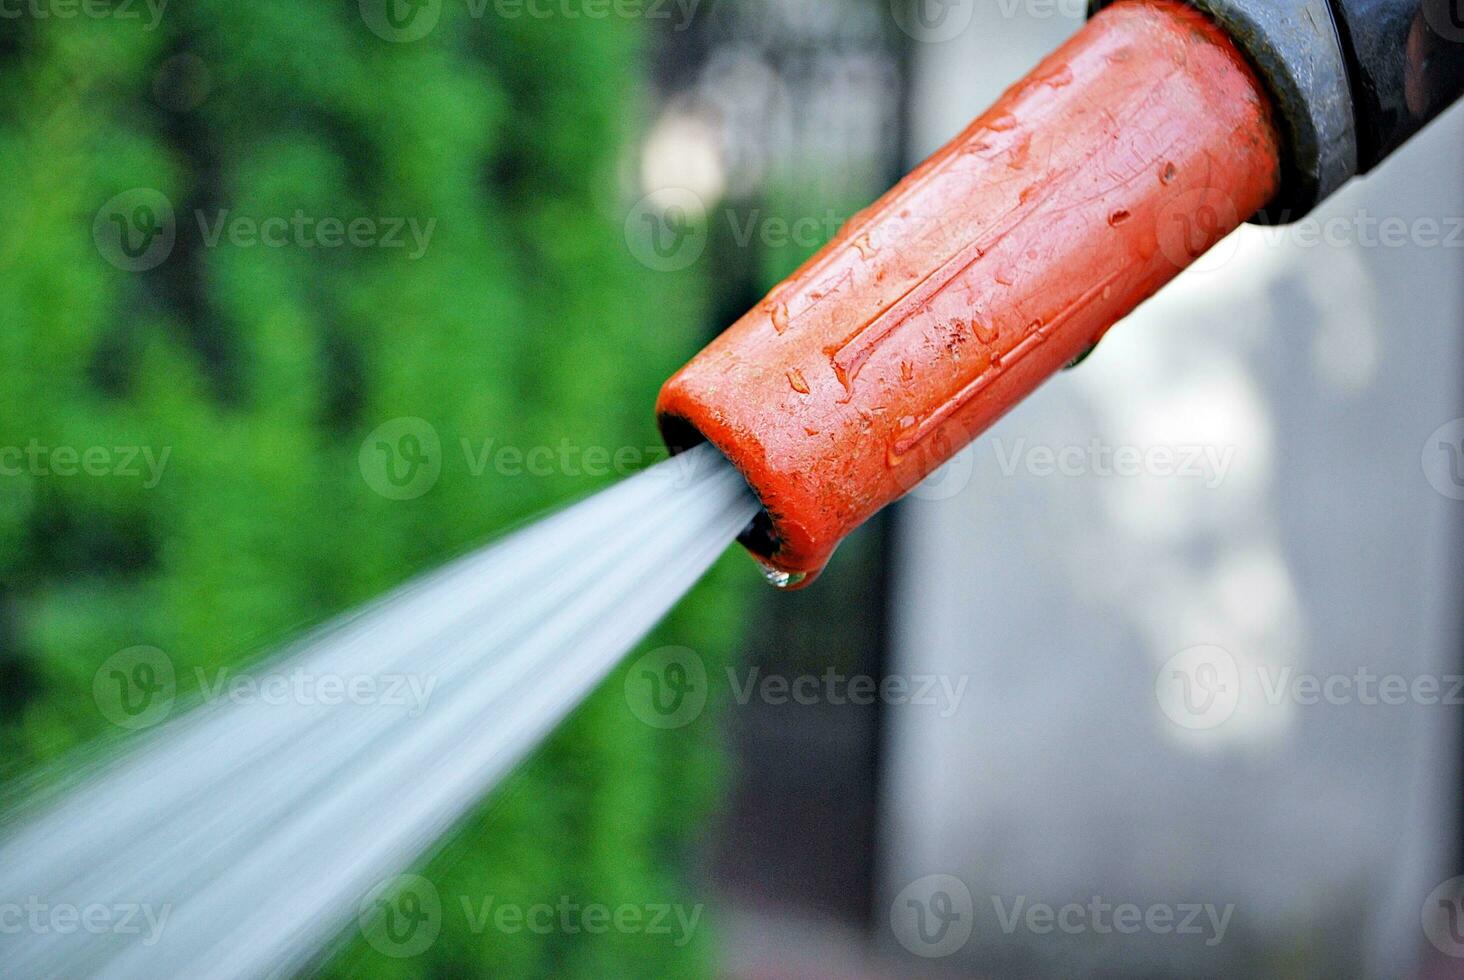 Water spraying from a garden hose photo